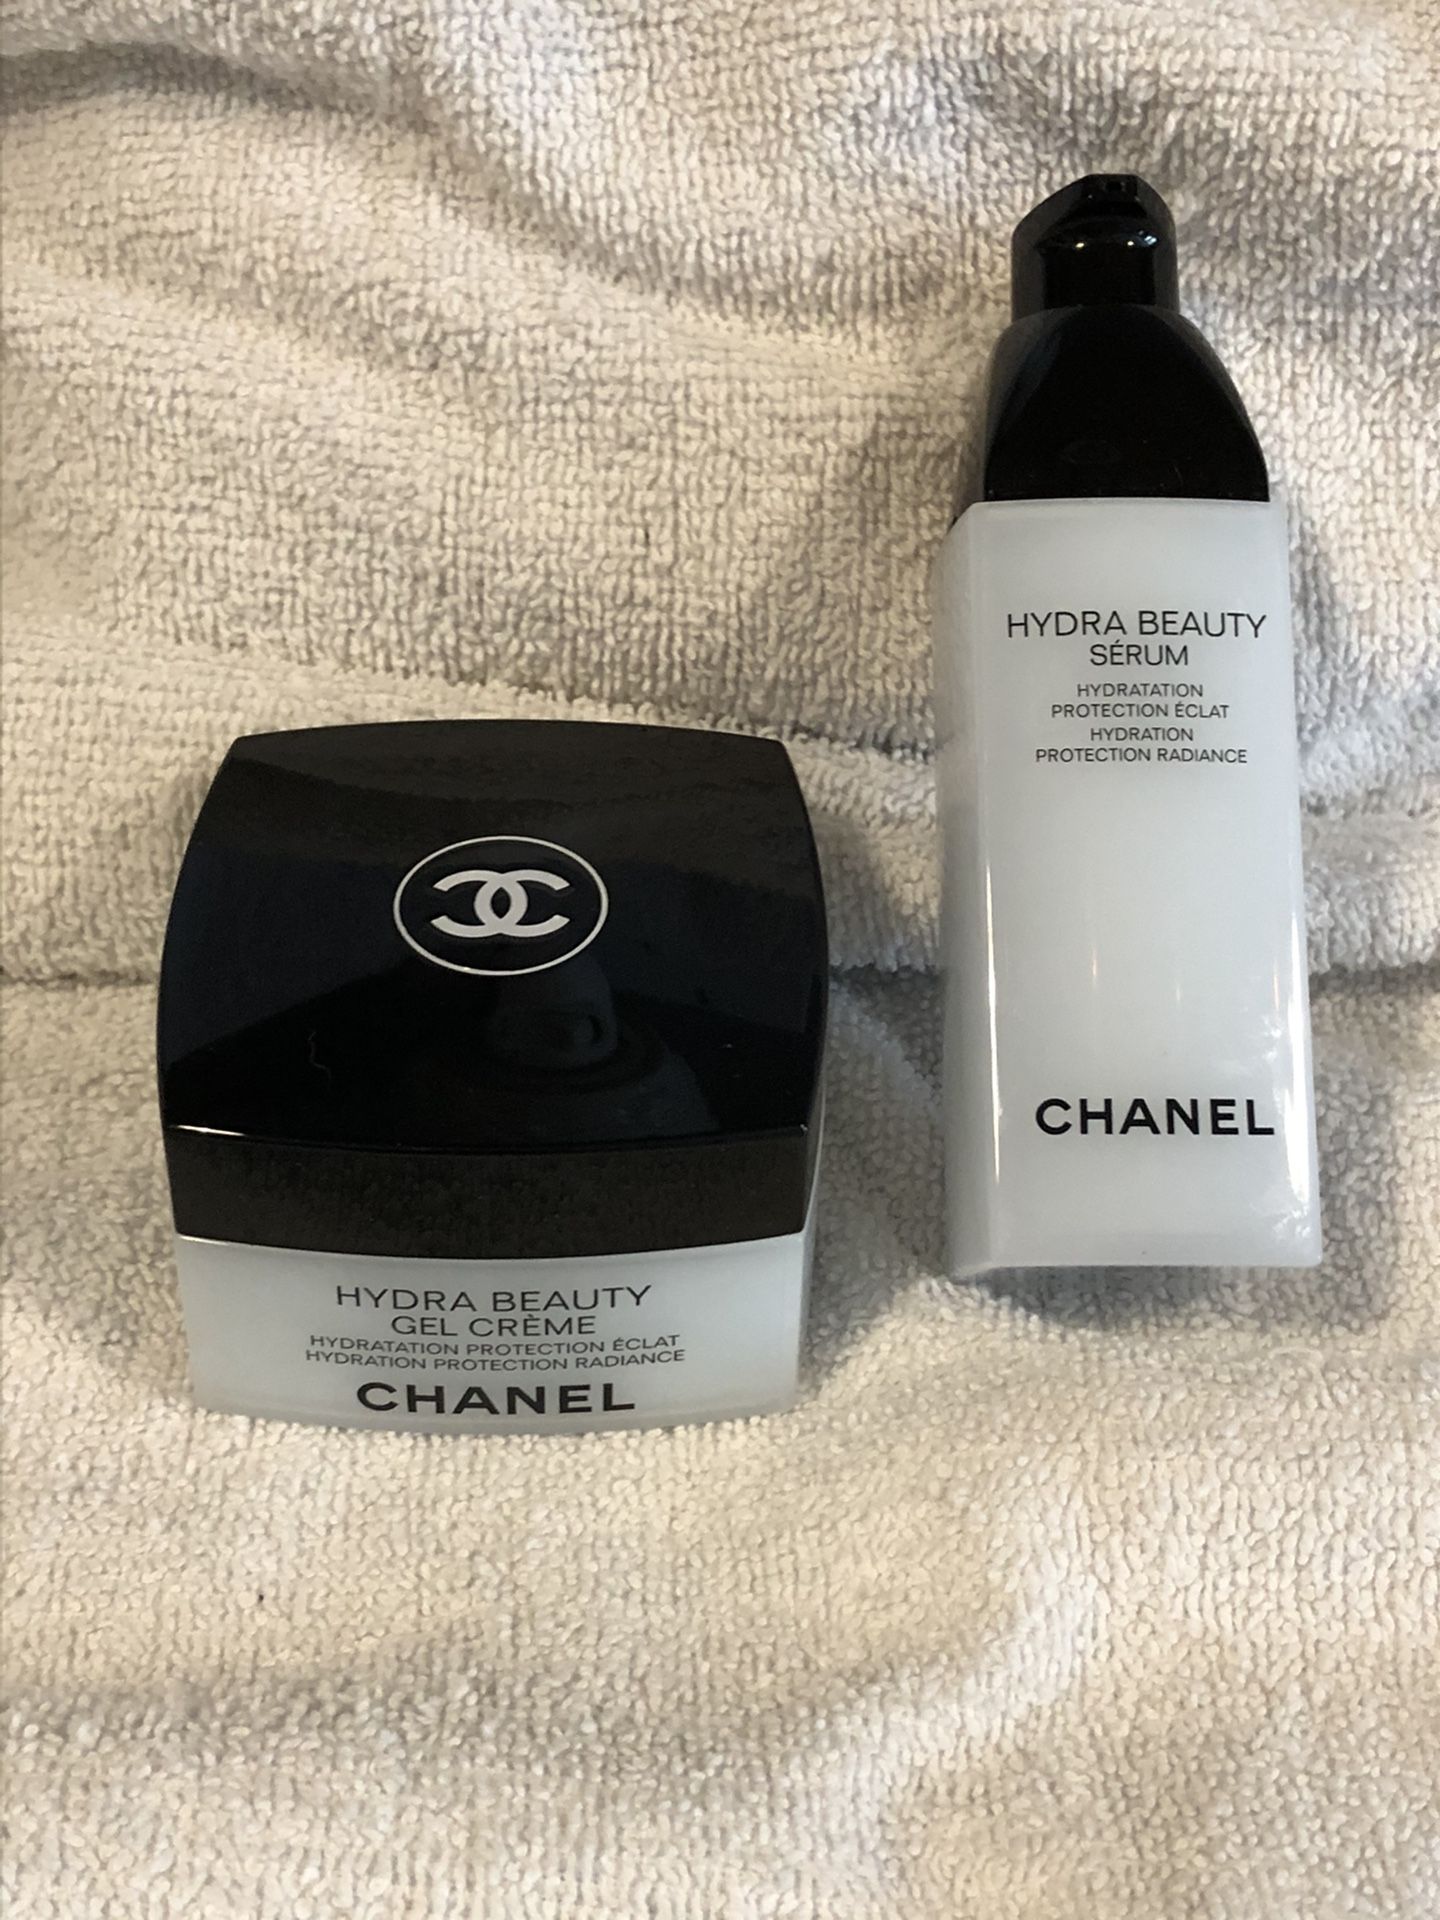 Authentic CHANEL Hydra Beauty Creme & Serum set makeup products - New!!